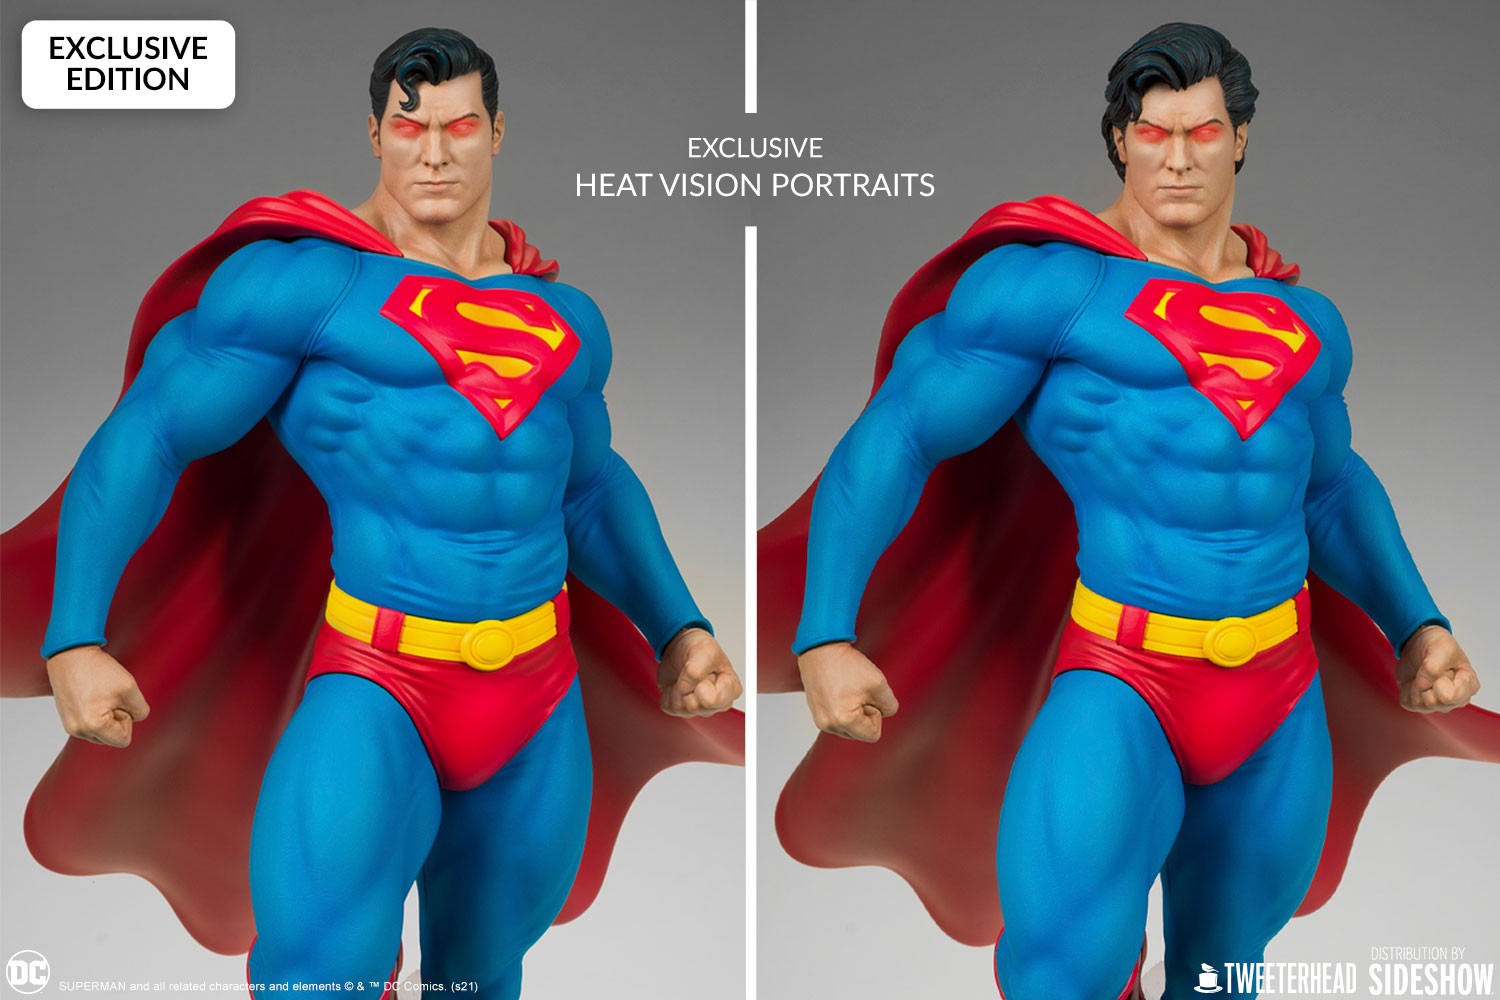 Superman Exclusive Edition (Prototype Shown) View 1